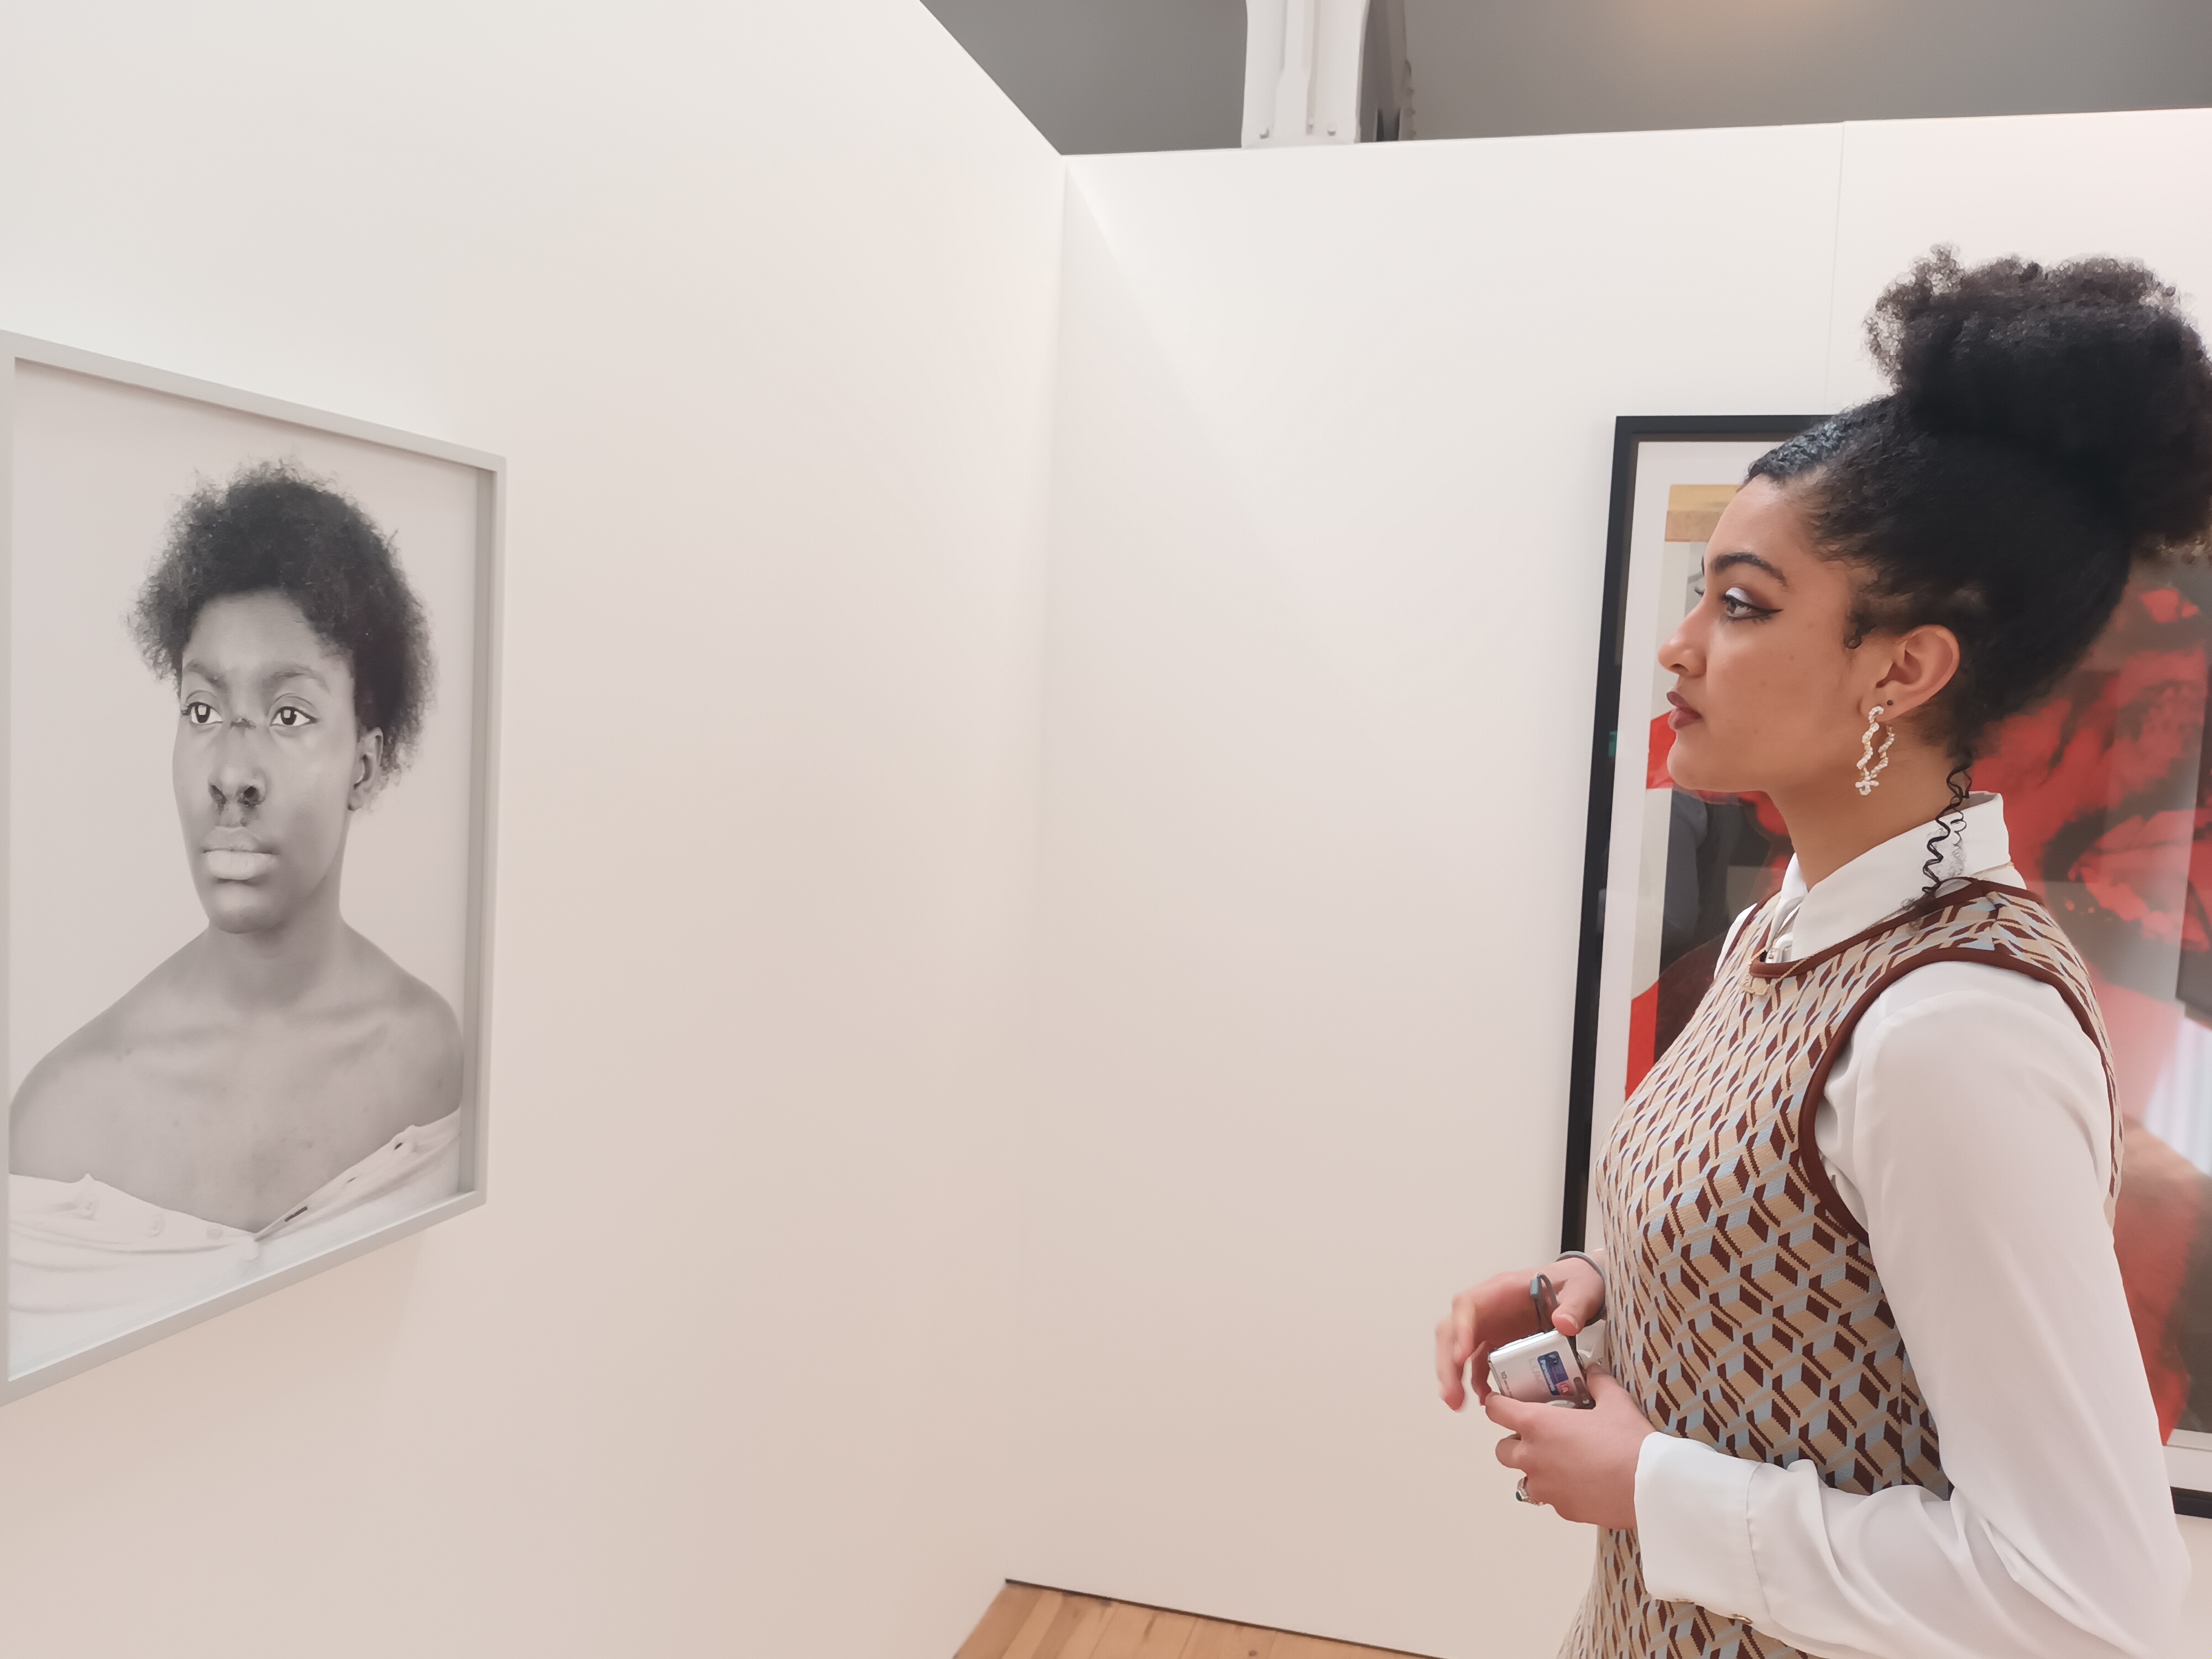 A person staring at a portrait hung on an art gallery wall